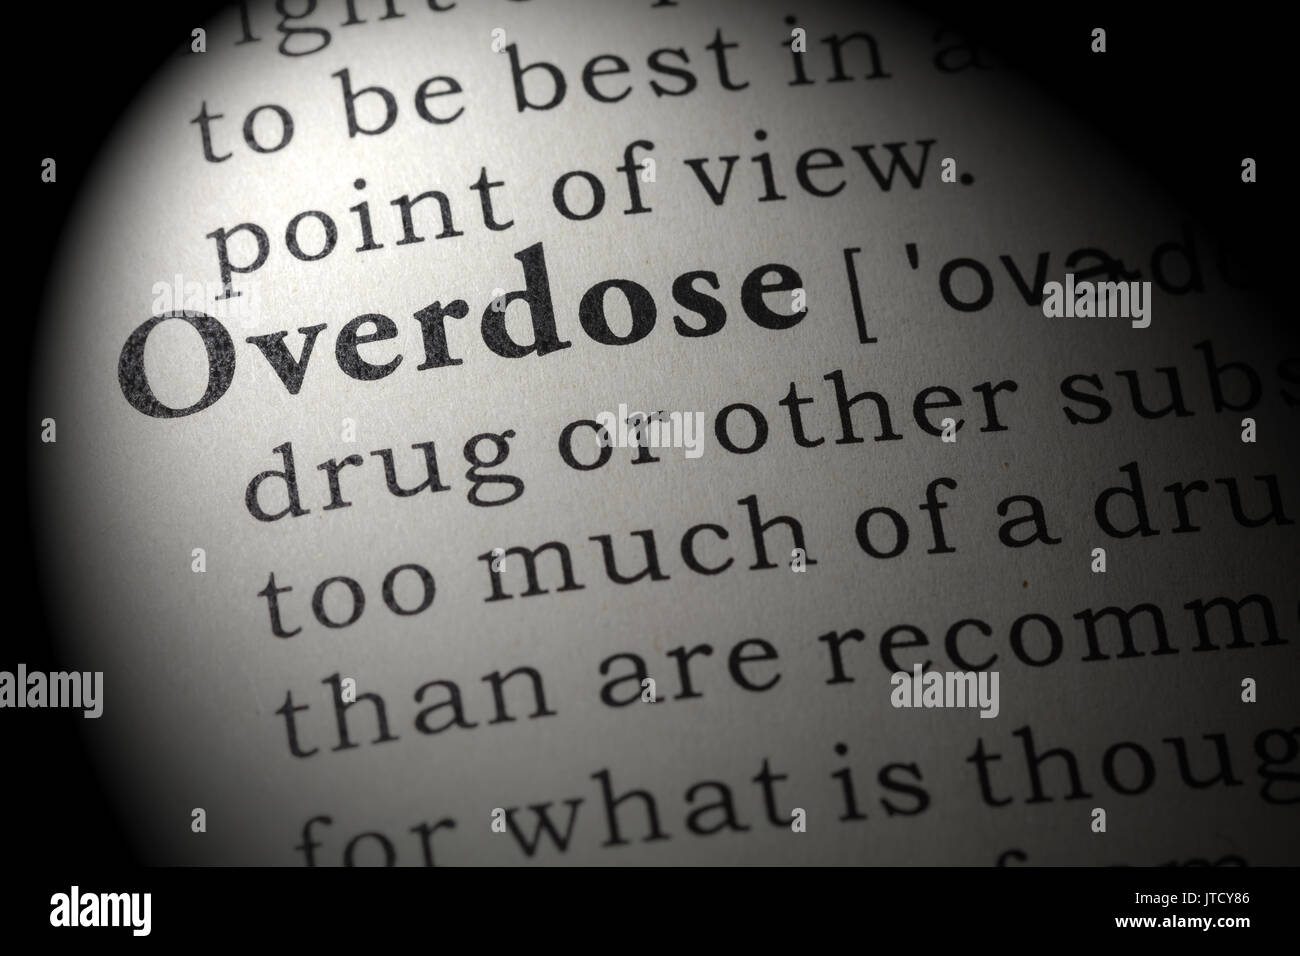 Fake Dictionary, Dictionary definition of the word overdose. including key descriptive words. Stock Photo